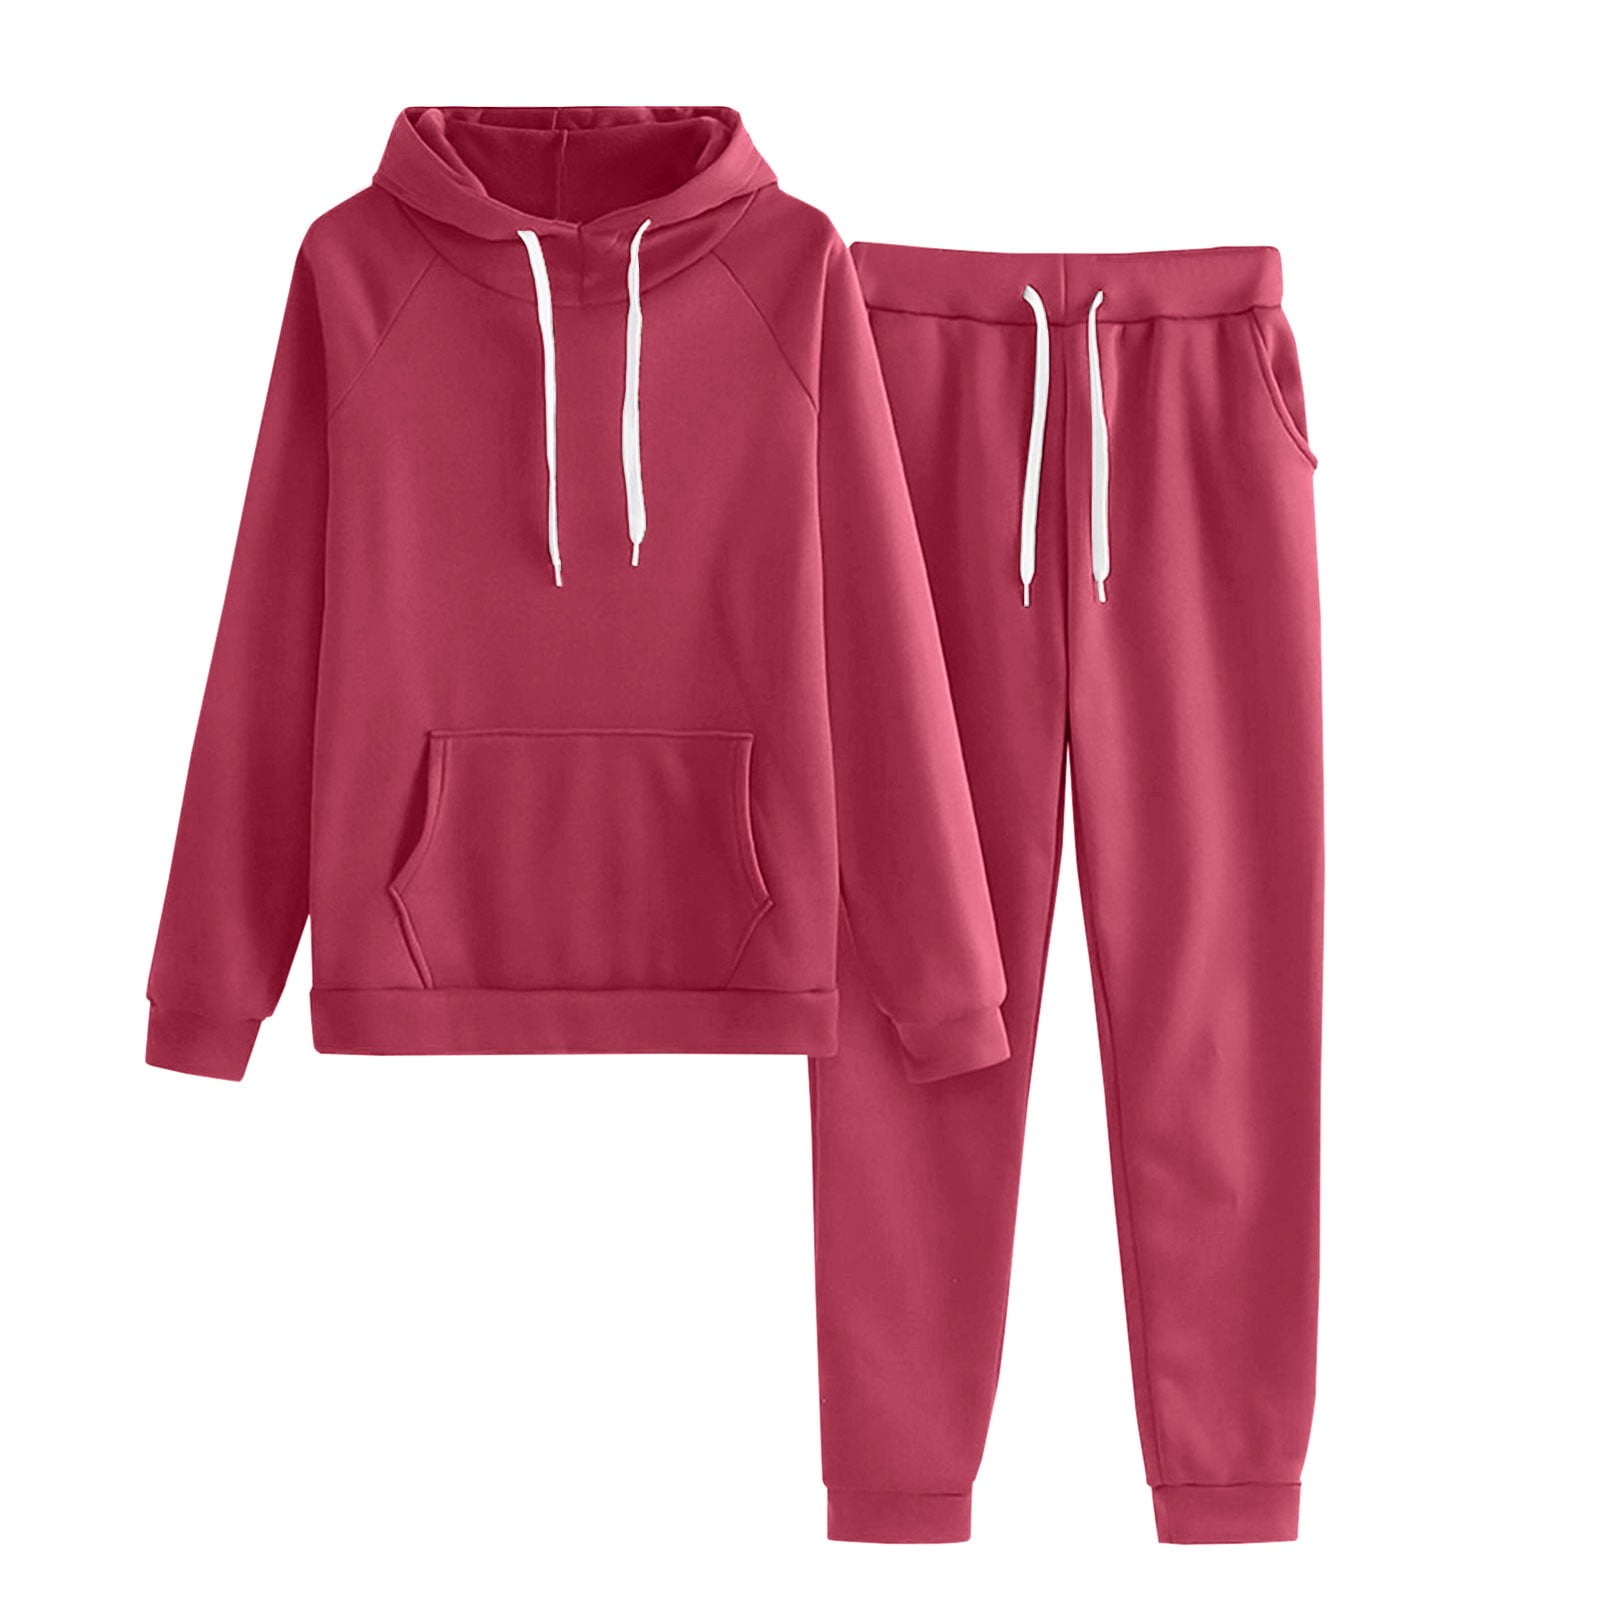  BTFBM Women Two Piece Outfits Long Sleeve Hoodie Sweat Pants Jogger  Set Fall Fashion Lightweight Tracksuit Sweatsuits(Solid Wine Red, Small) :  Clothing, Shoes & Jewelry